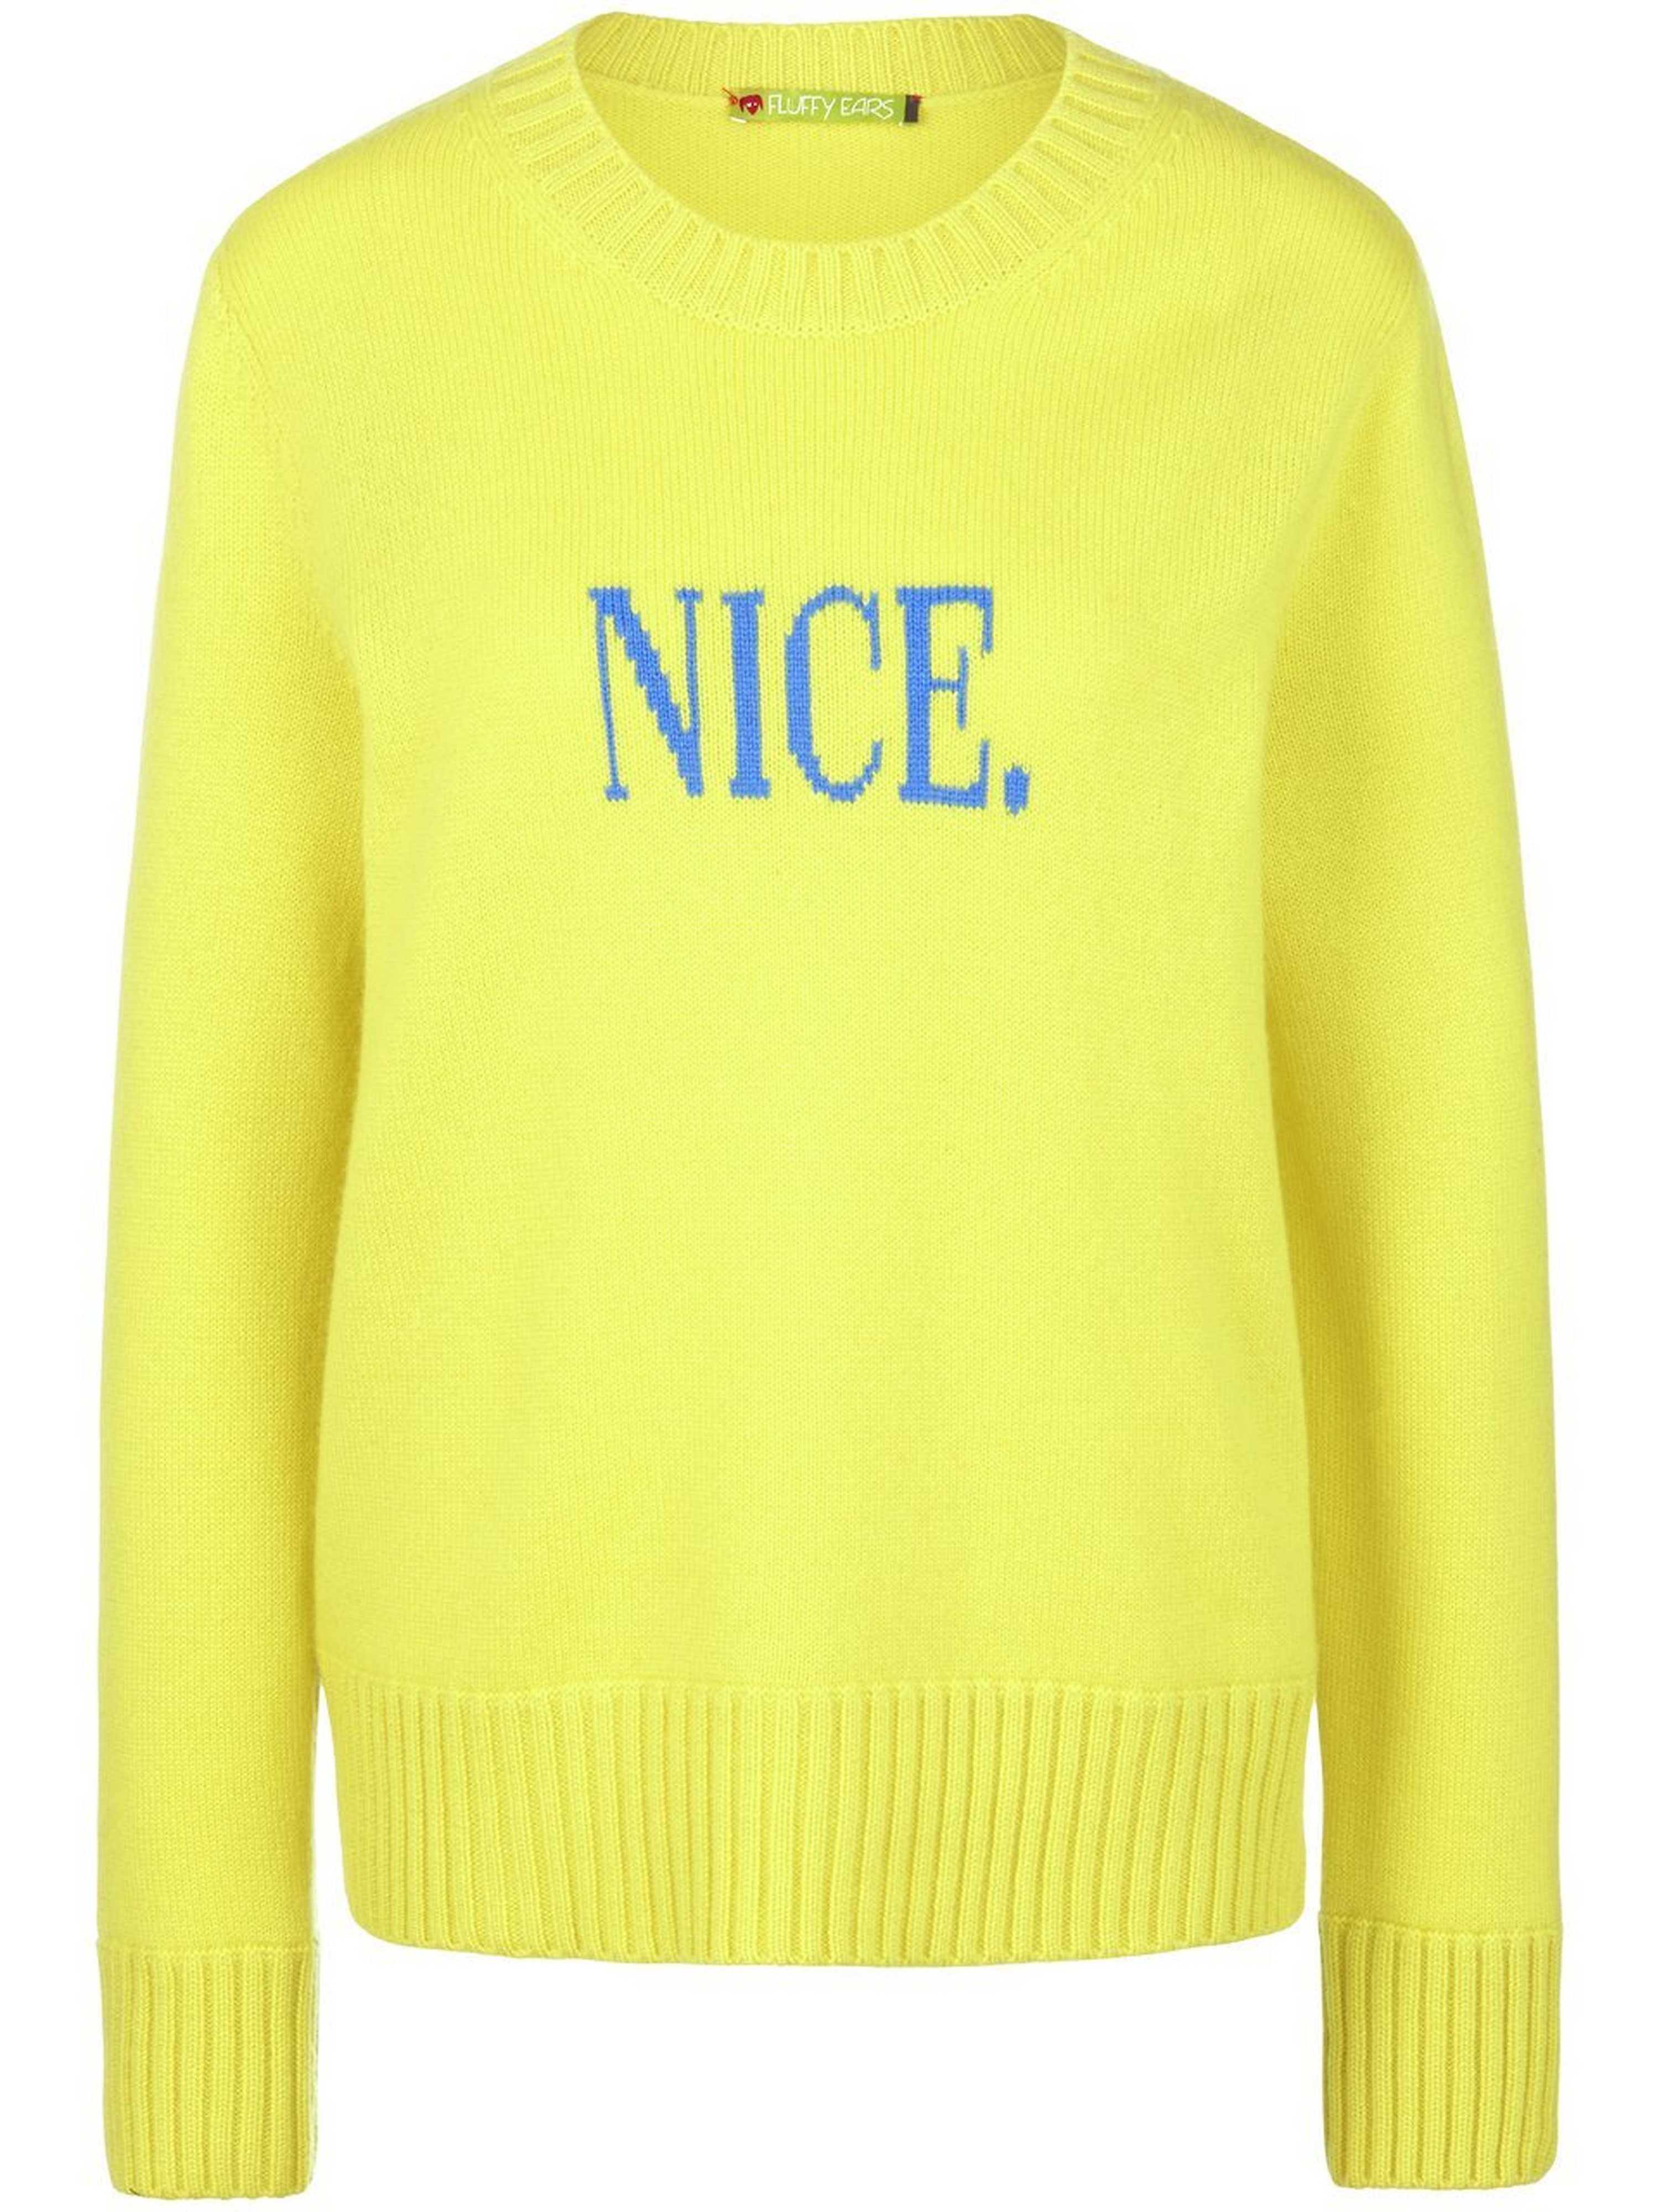 Le pull manches longues  FLUFFY EARS jaune taille 38